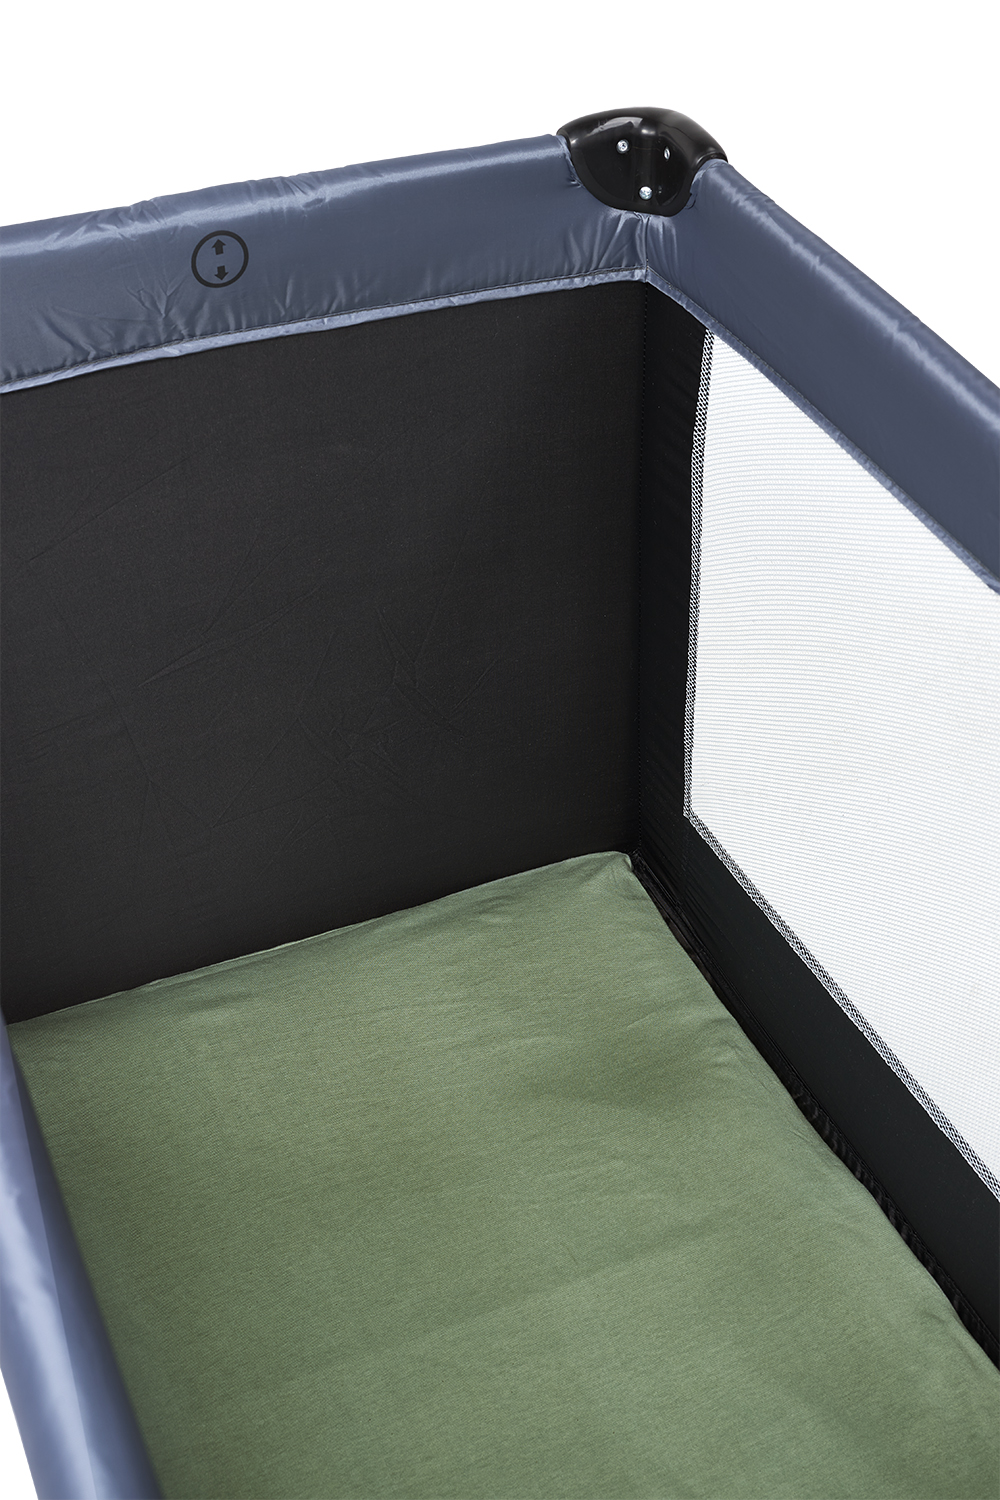 Camping bed mattress cover deluxe Uni - forest green - 60x120cm